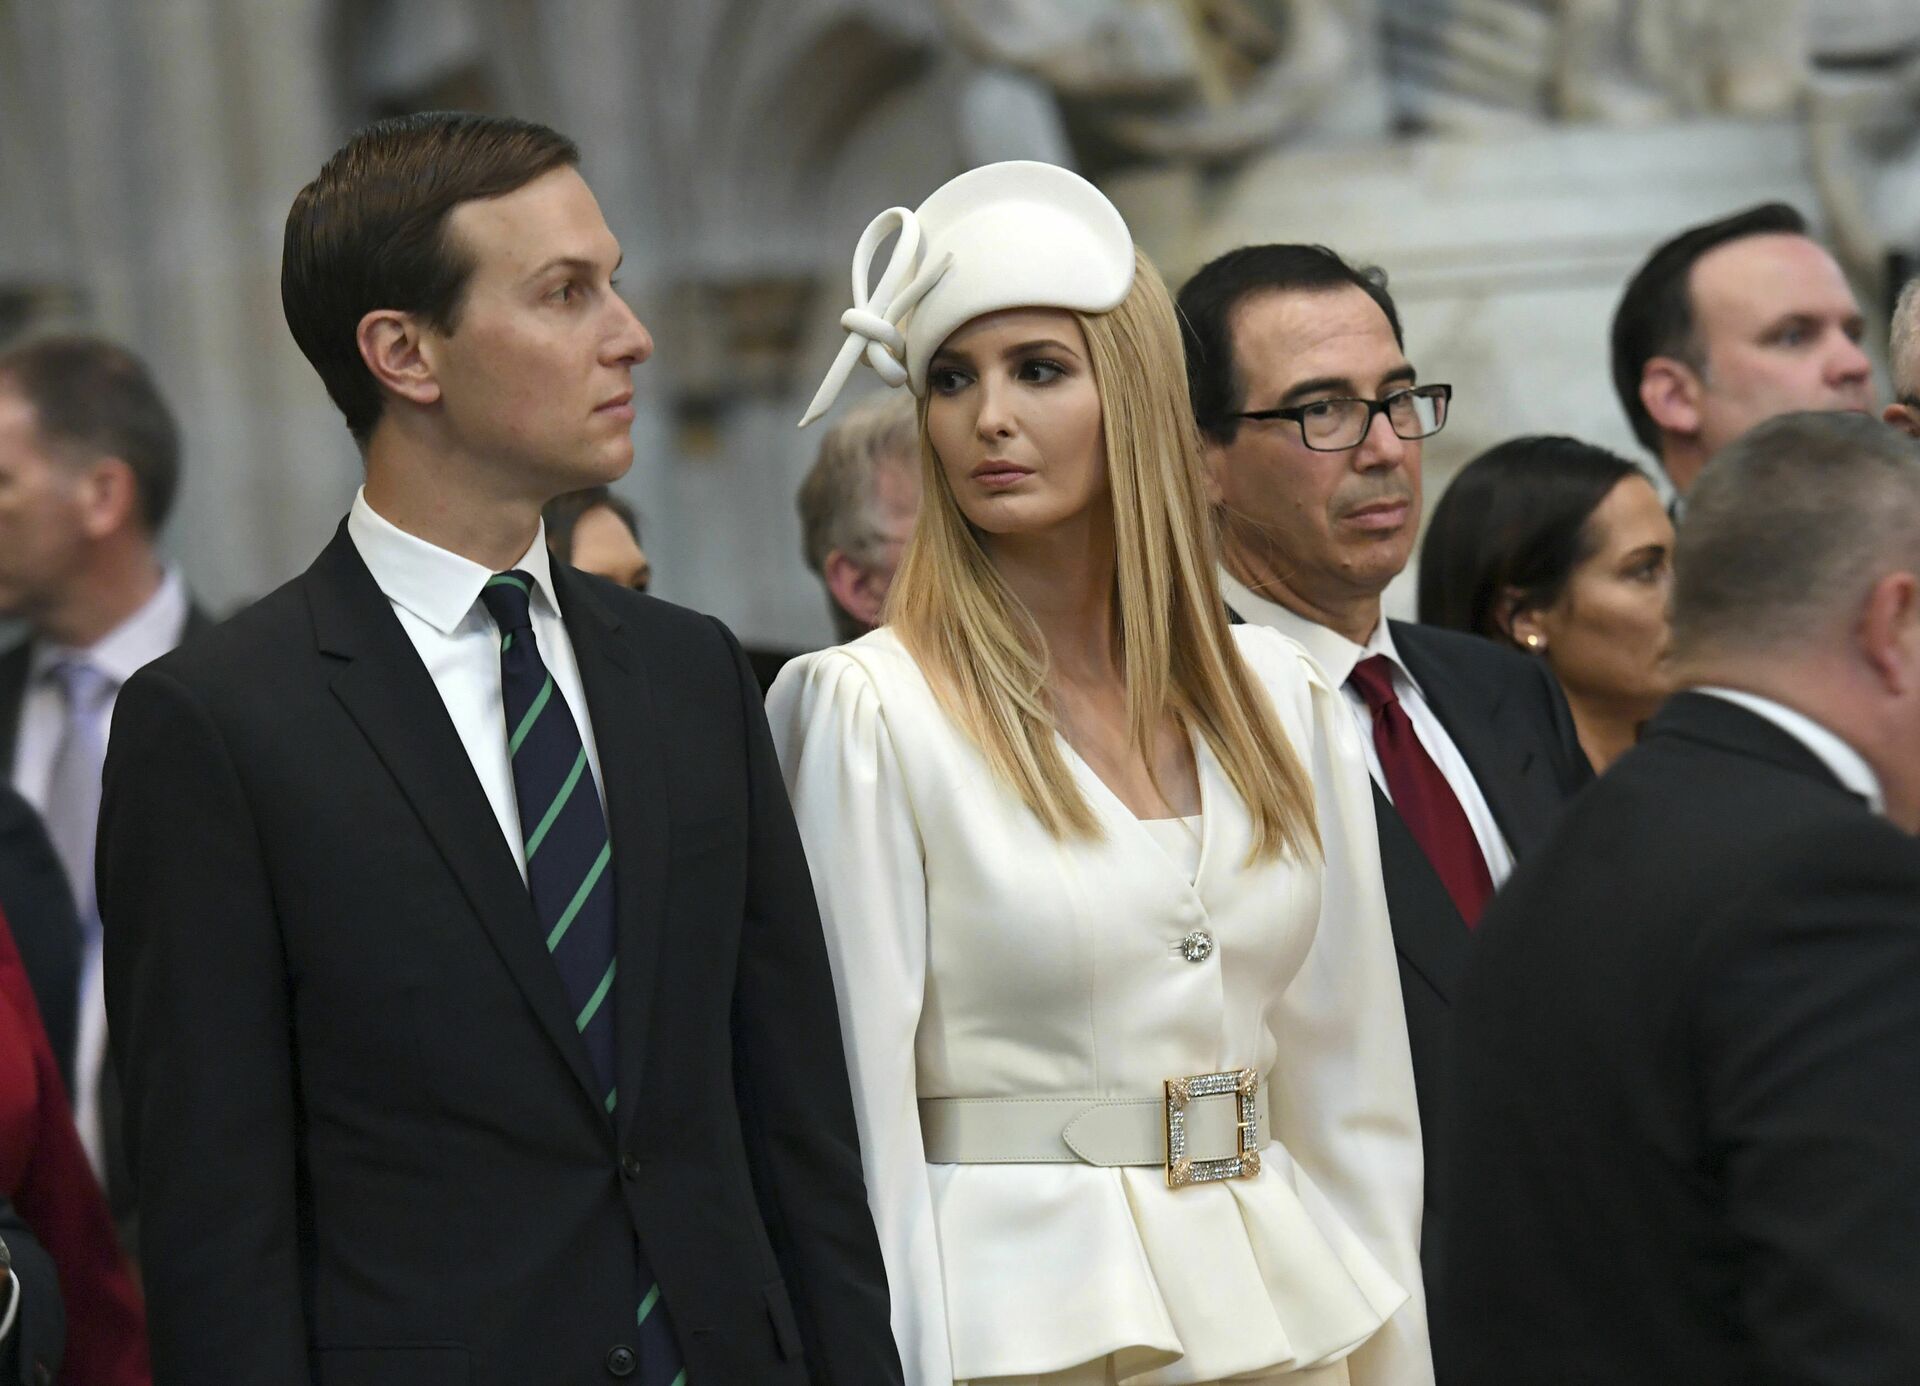 Ivanka Trump and Jared Kushner look on as U.S President Donald Trump places a wreath on the Grave of the Unknown Warrior during a tour of Westminster Abbey in central London, Monday, June 3, 2019. Trump is on a three-day state visit to Britain - Sputnik International, 1920, 06.10.2021